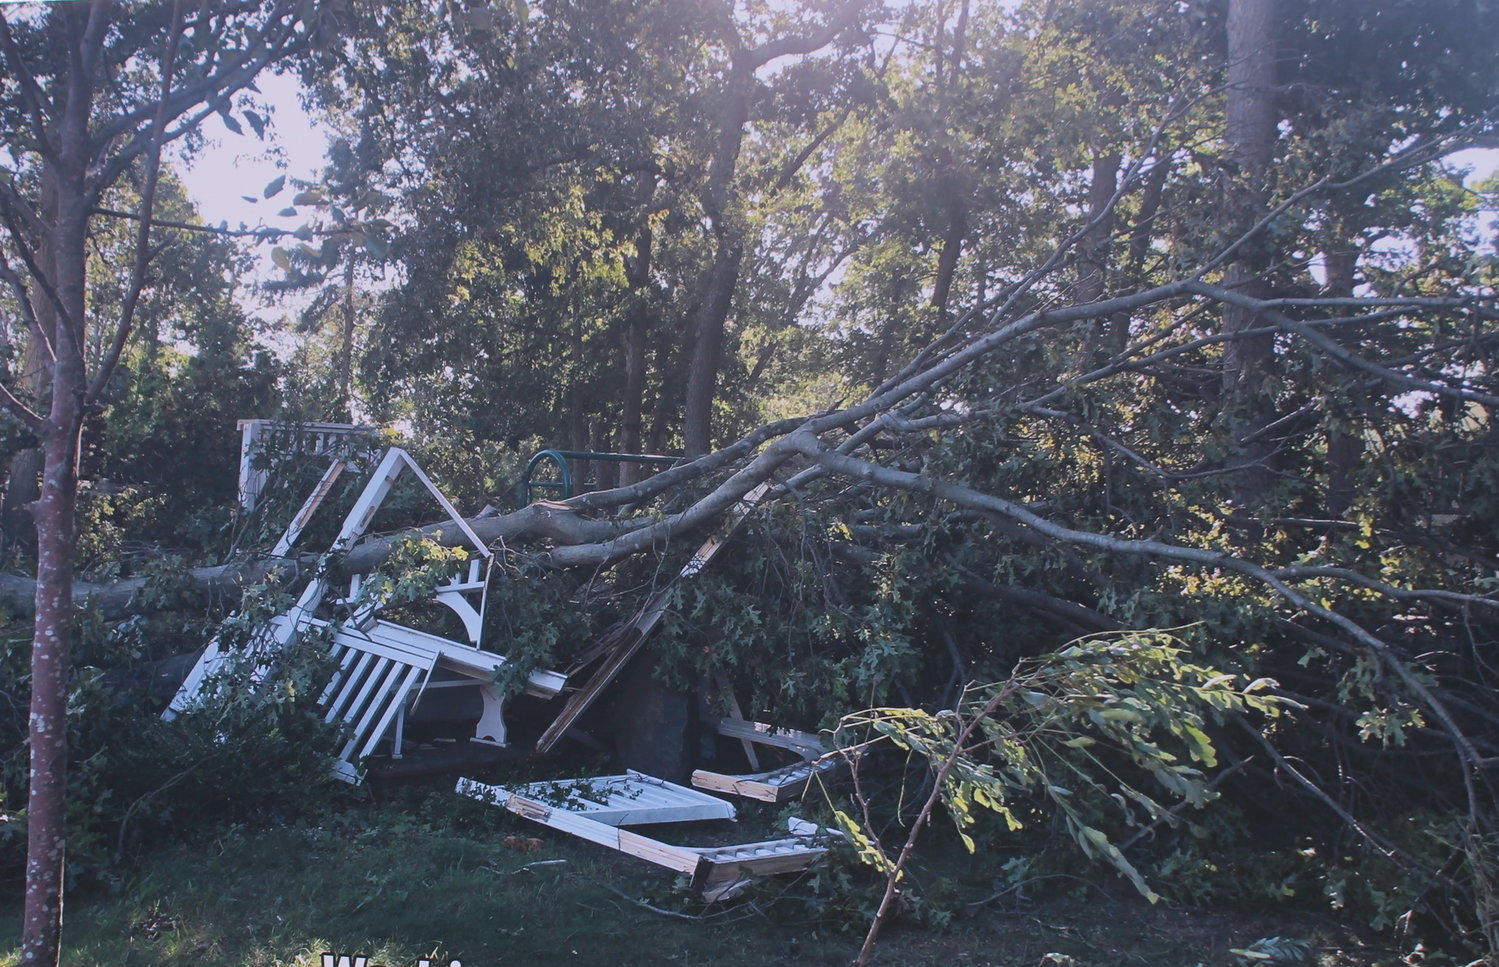 The gazebo was destroyed in Aug. 2020 after Tropical Storm Isias caused major damage.